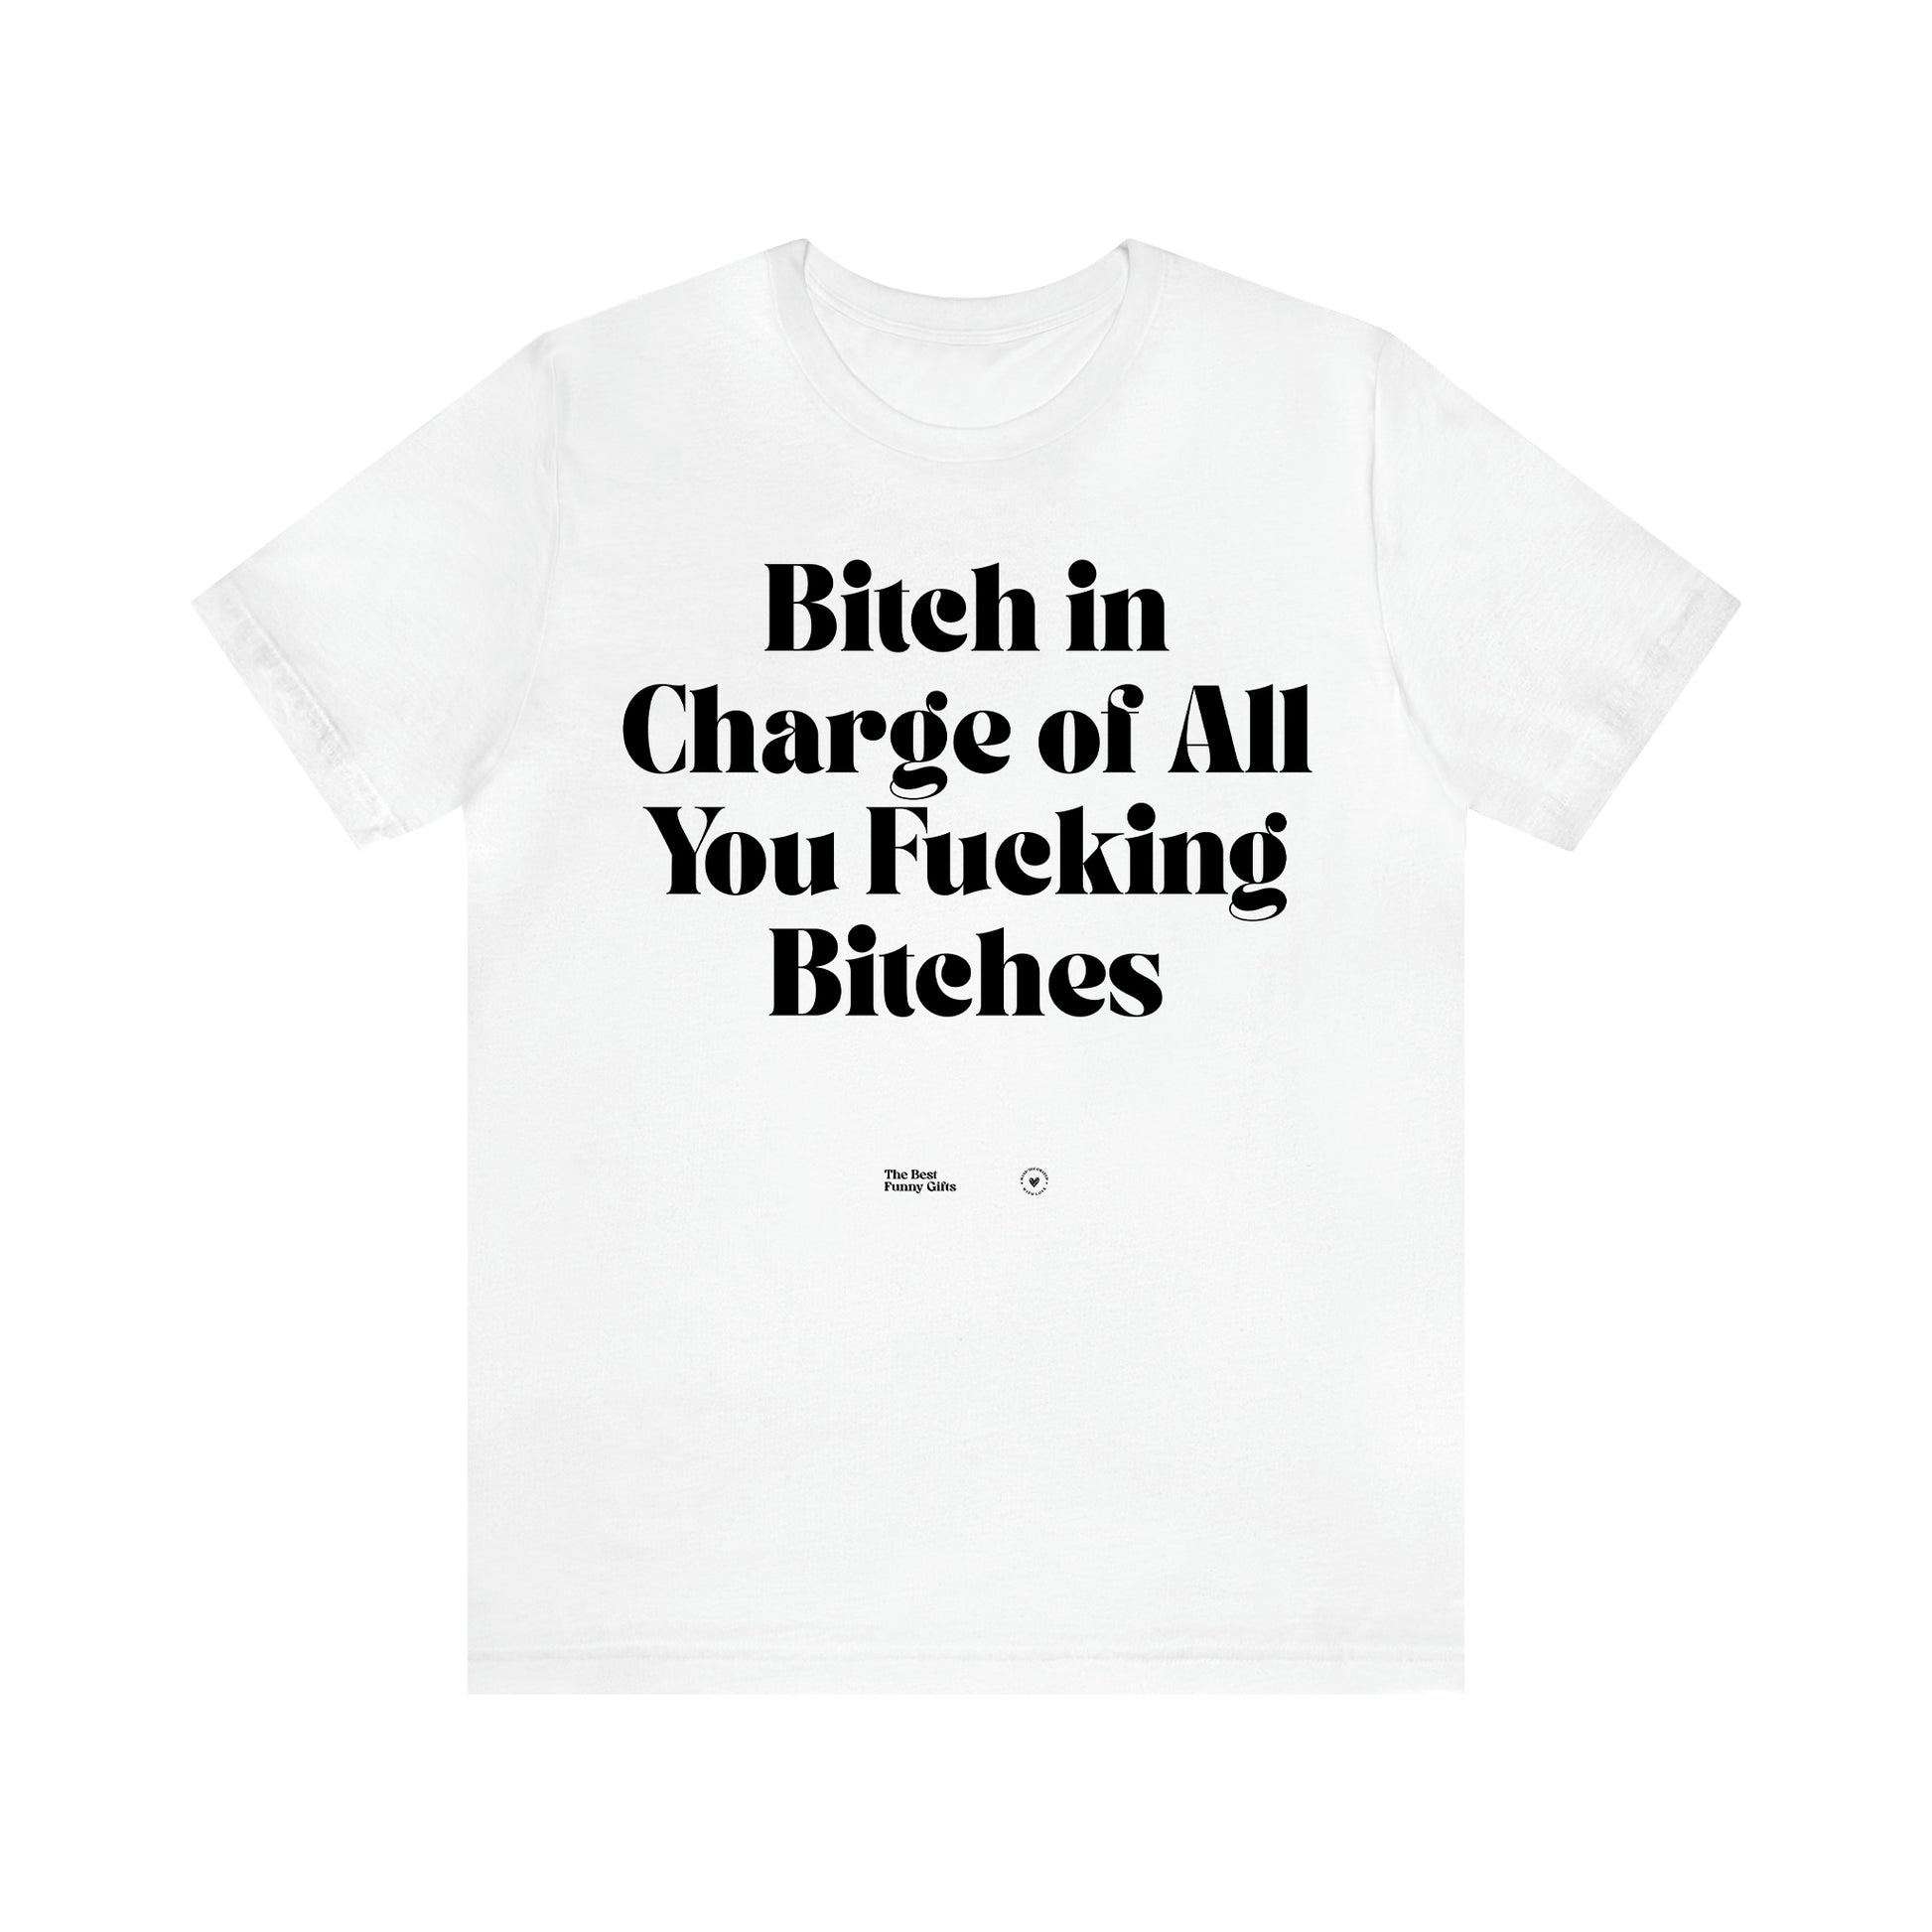 Women's T Shirts Bitch in Charge of All You Fucking Bitches - The Best Funny Gifts